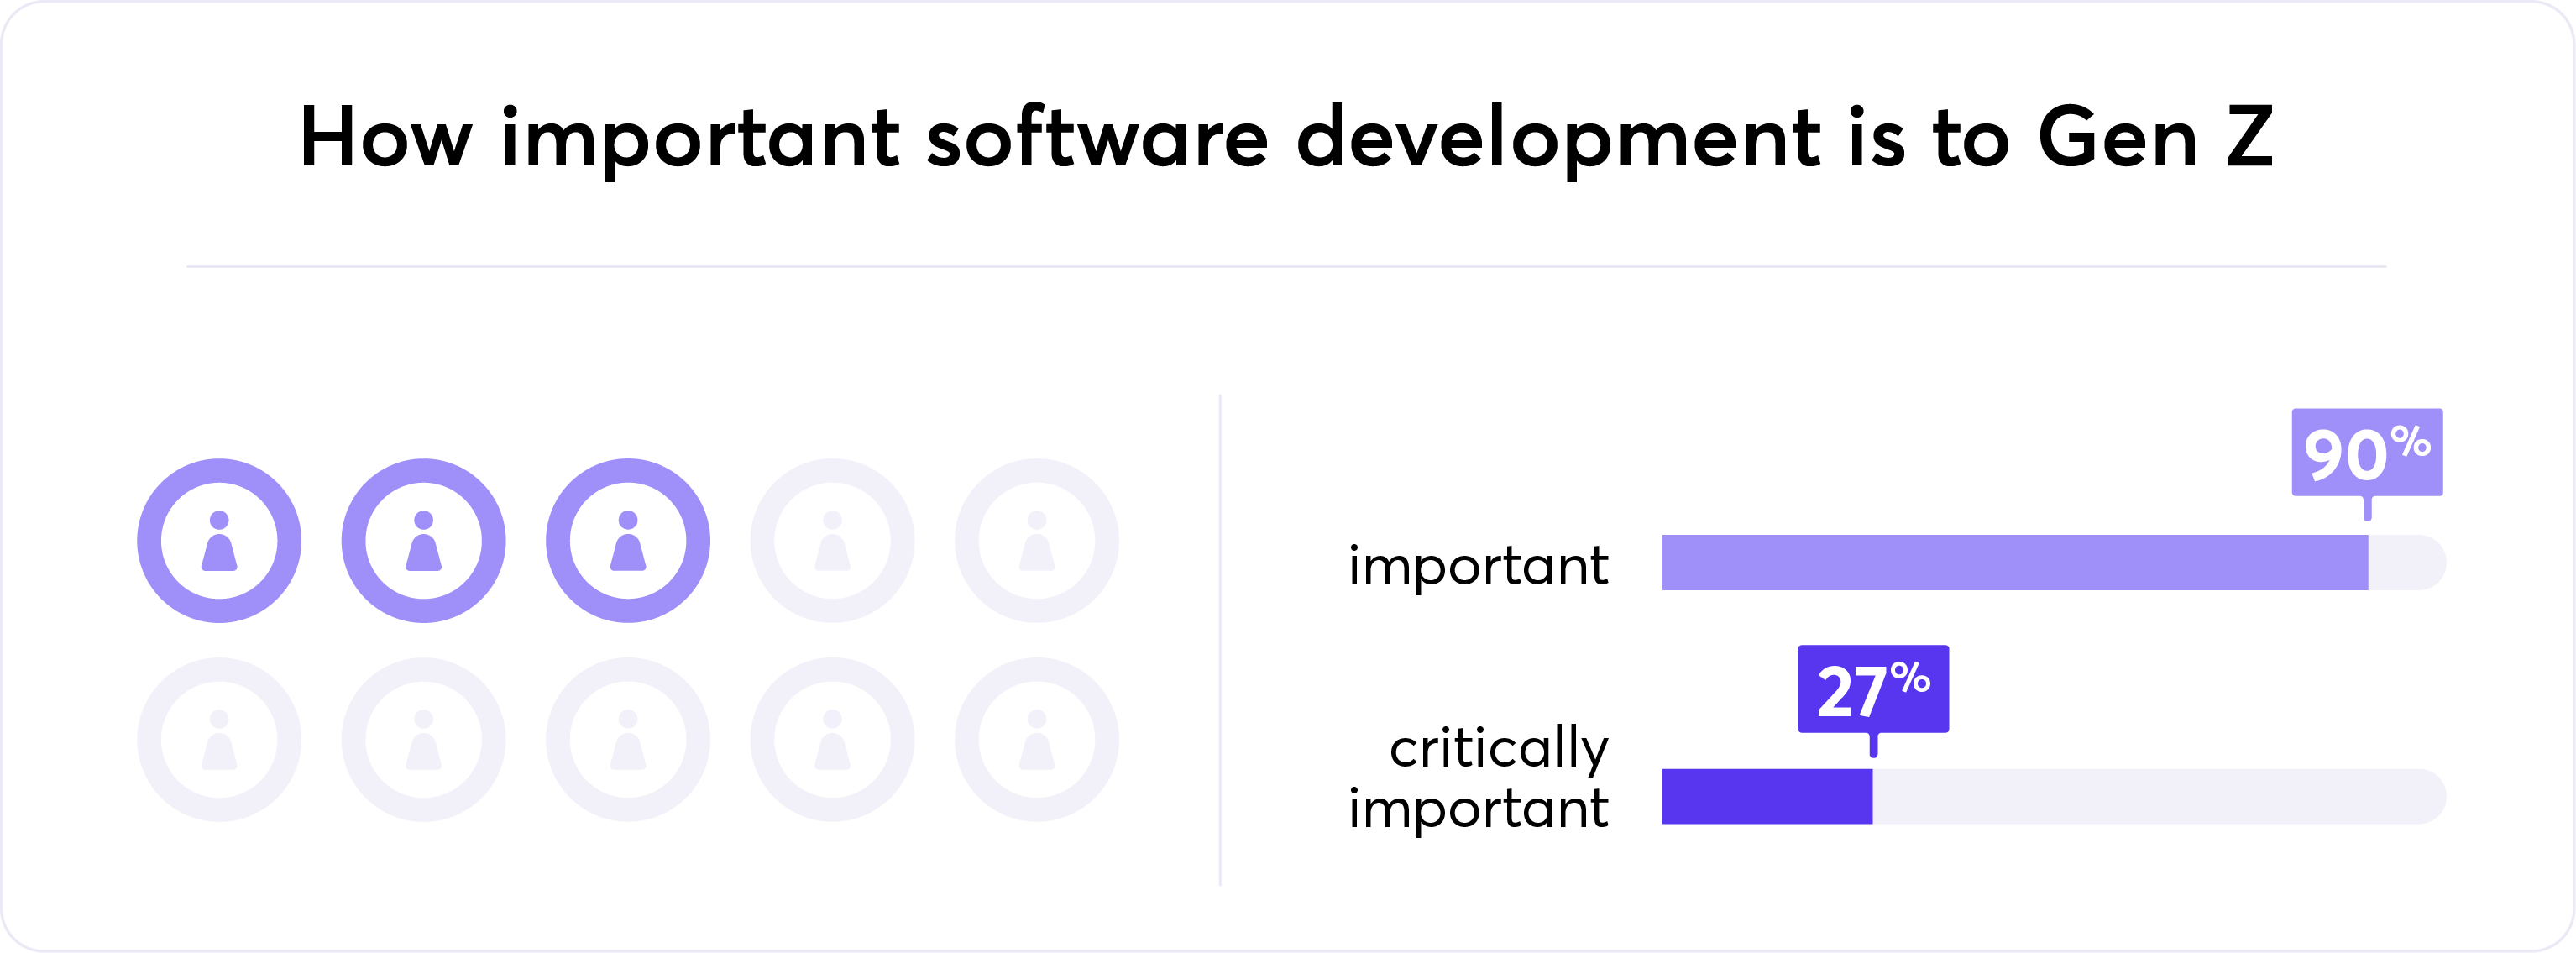 How important software development is to Gen Z graphic